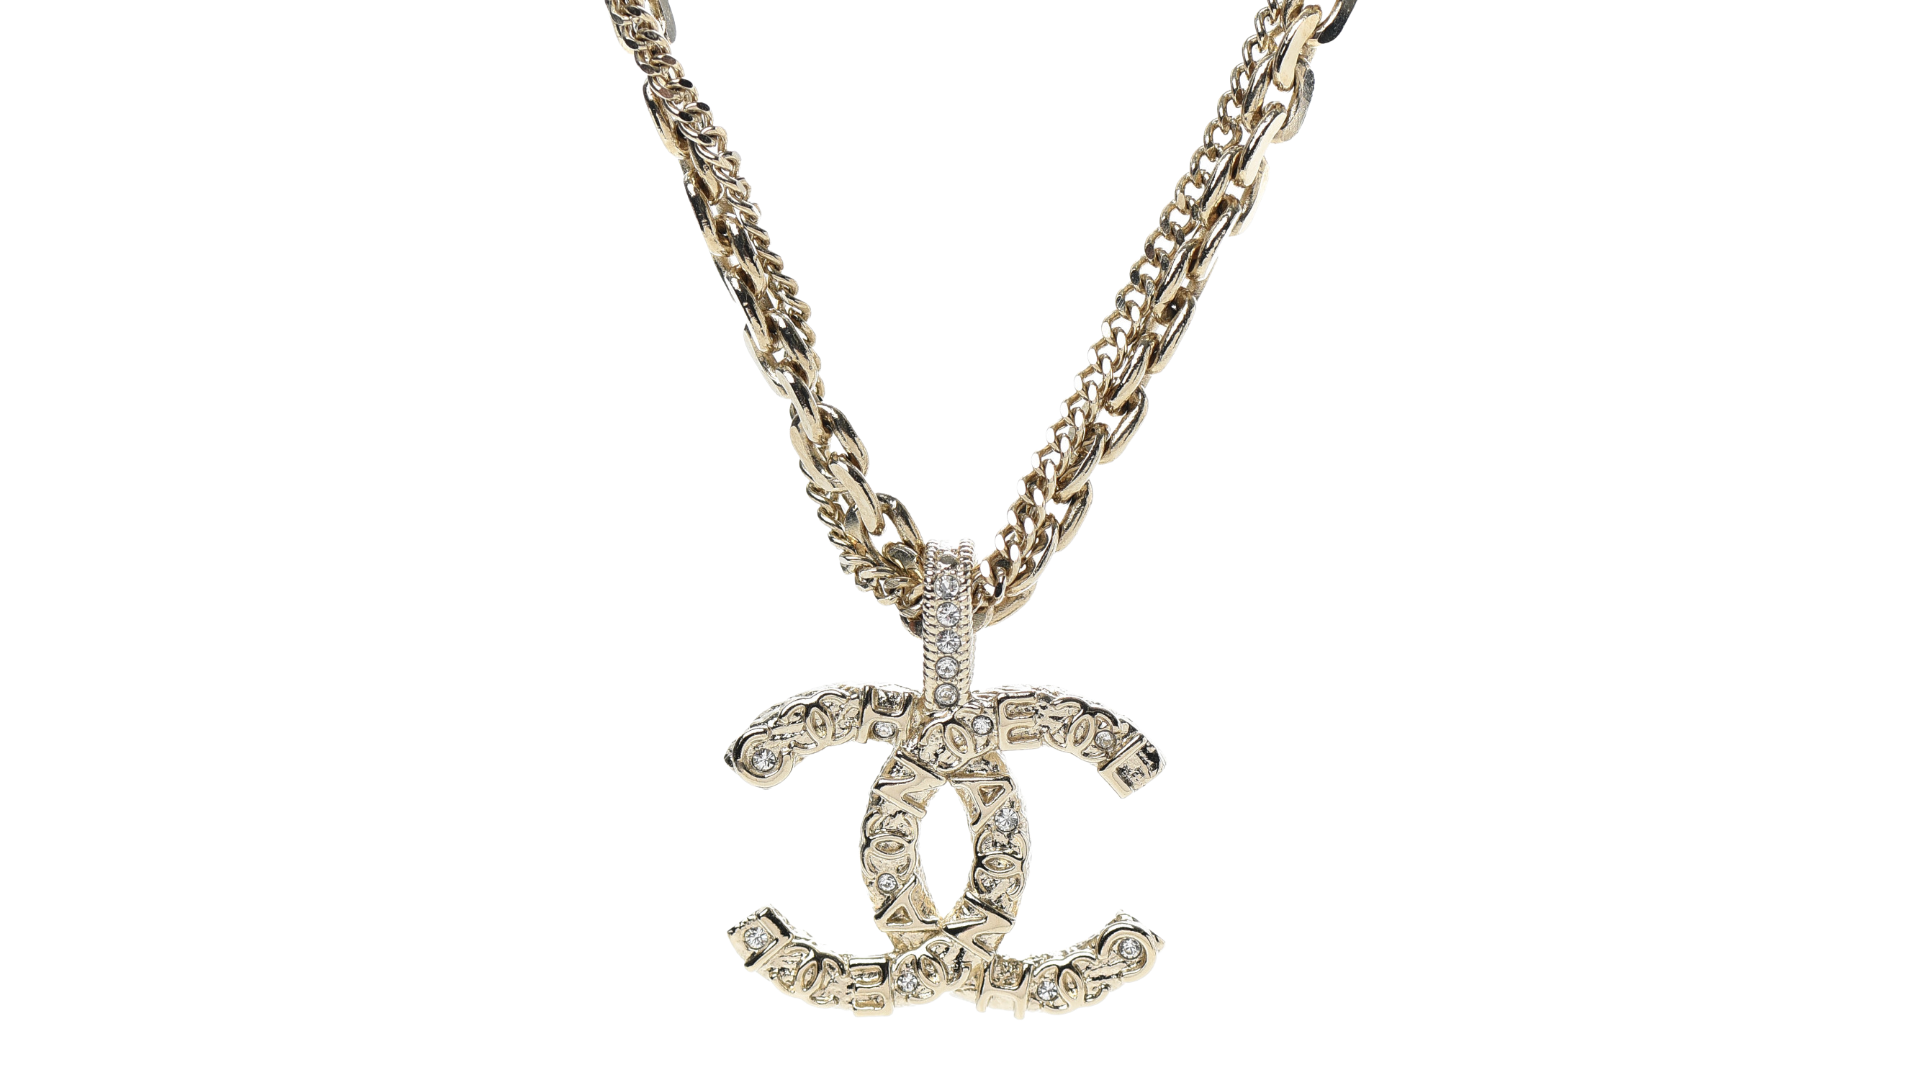 Chanel Crystal CC Multi Strand Chain Necklace Gold